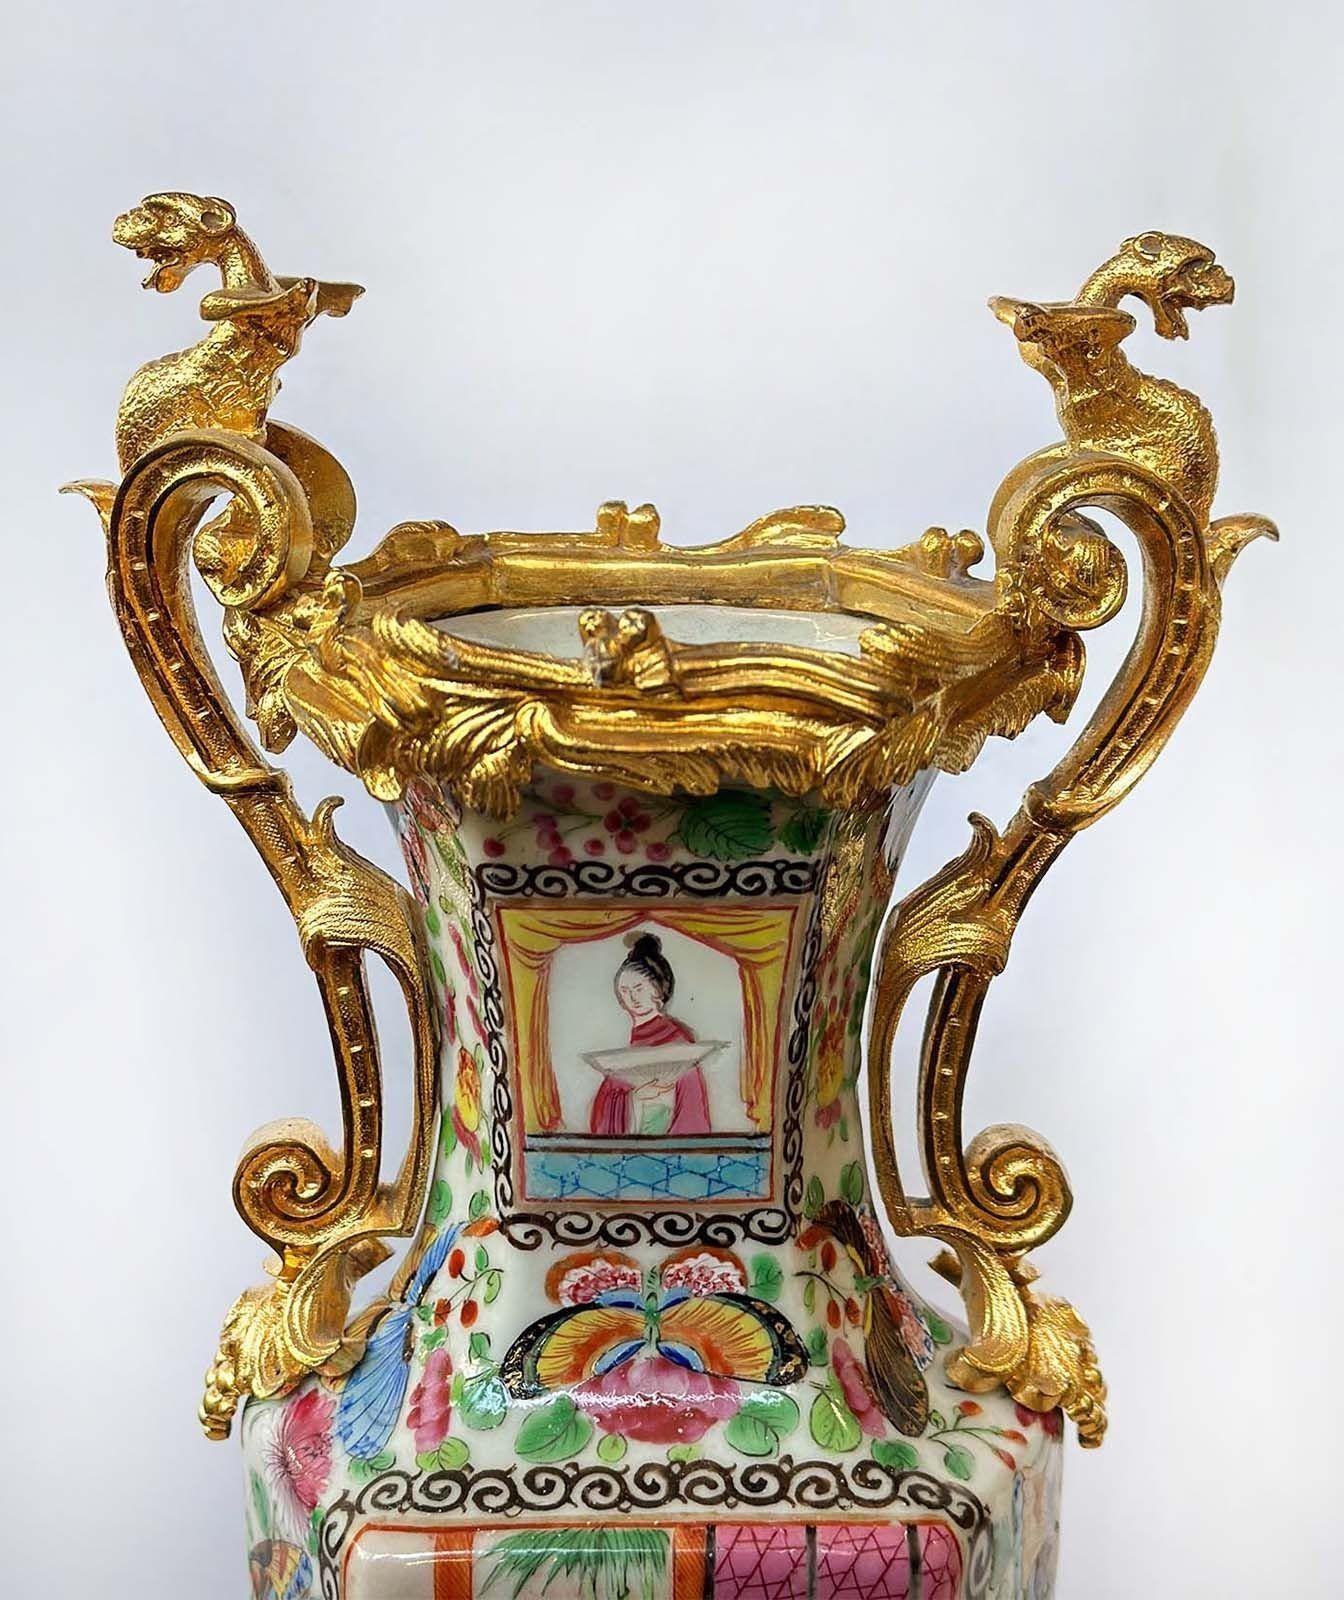 Chinese traditional Famille Rose Canton vases made with quality bronze and porcelain, having beautiful hand-painted details such as depictions of daily life, traditional Chinese scenes, botanical figures and butterflies, and the body has a unique